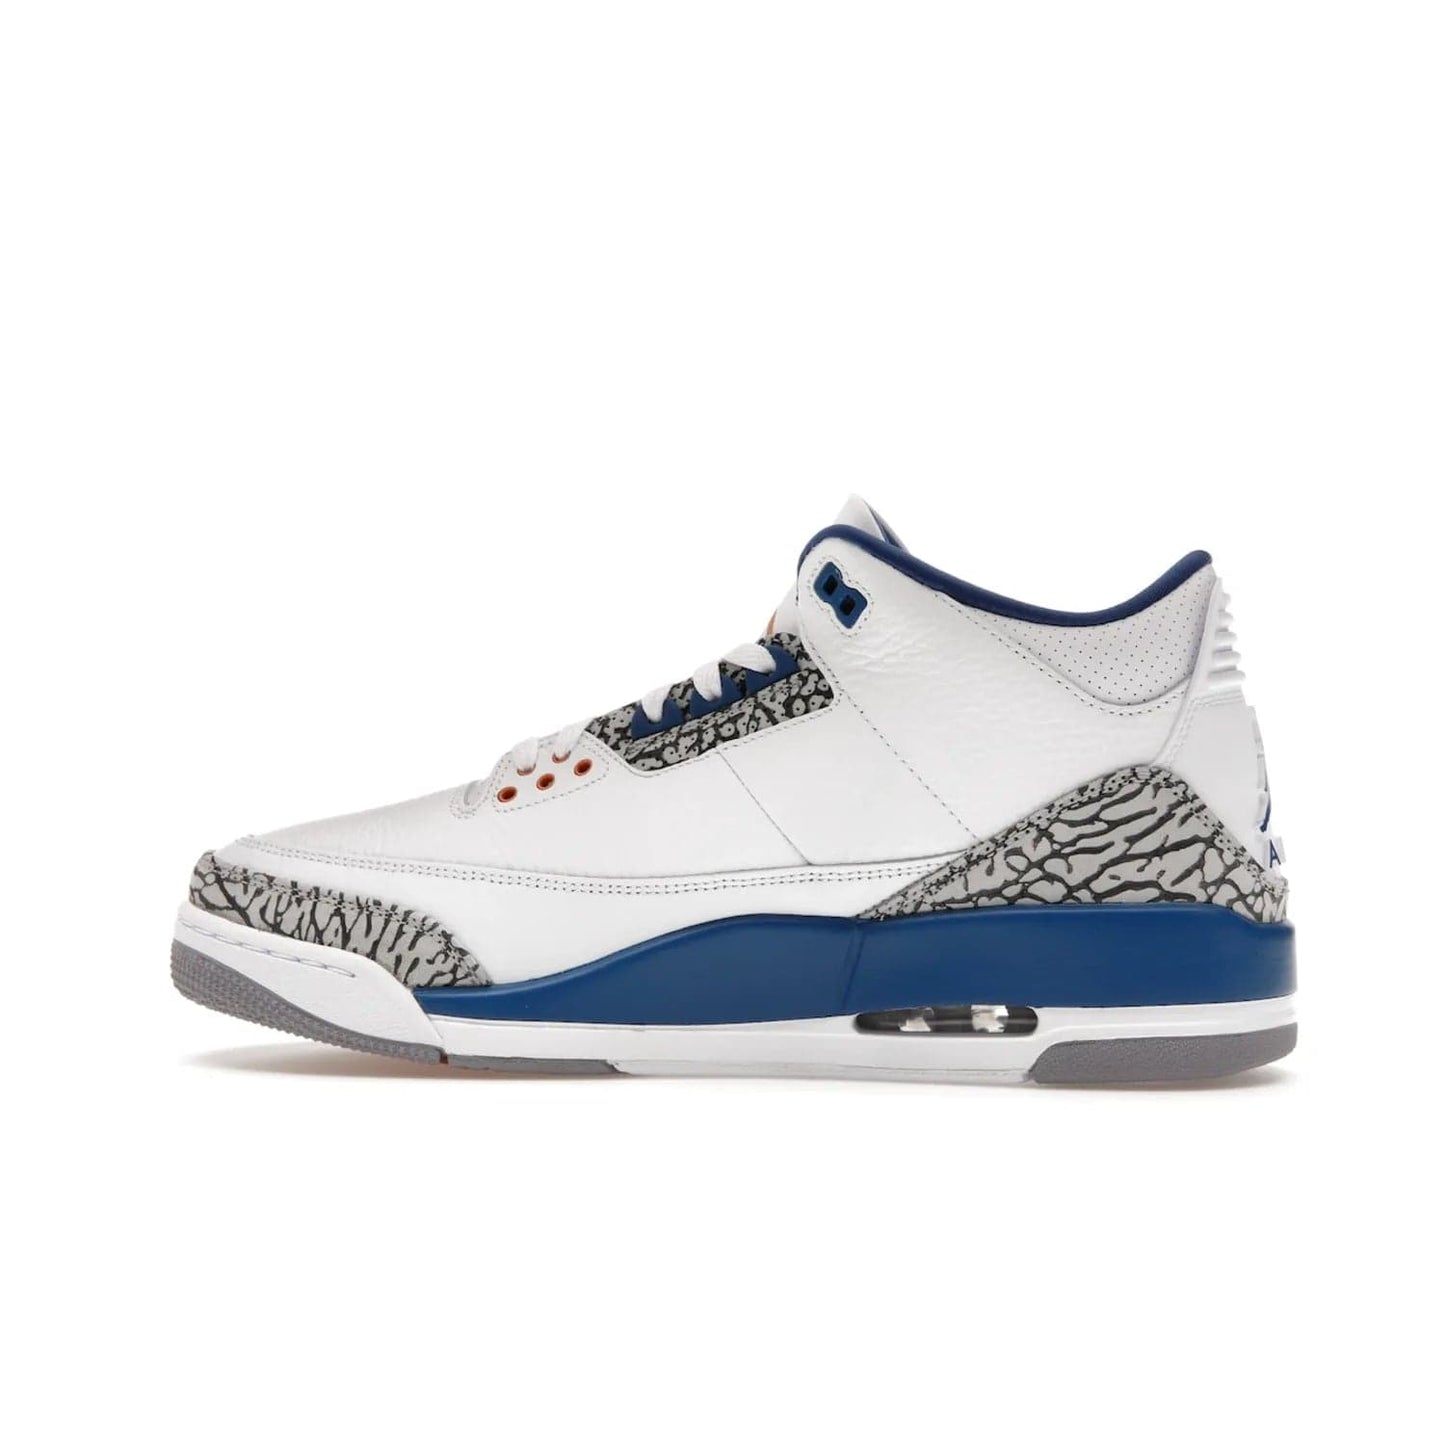 Jordan 3 Retro Wizards - Image 20 - Only at www.BallersClubKickz.com - ##
Special tribute sneaker from Jordan Brand to Michael Jordan's time with the Washington Wizards. Iconic white upper, orange Jumpman logo, blue accents, metallic copper details, and cement grey outsole. Buy the Air Jordan 3 Retro Wizards April 29, 2023.